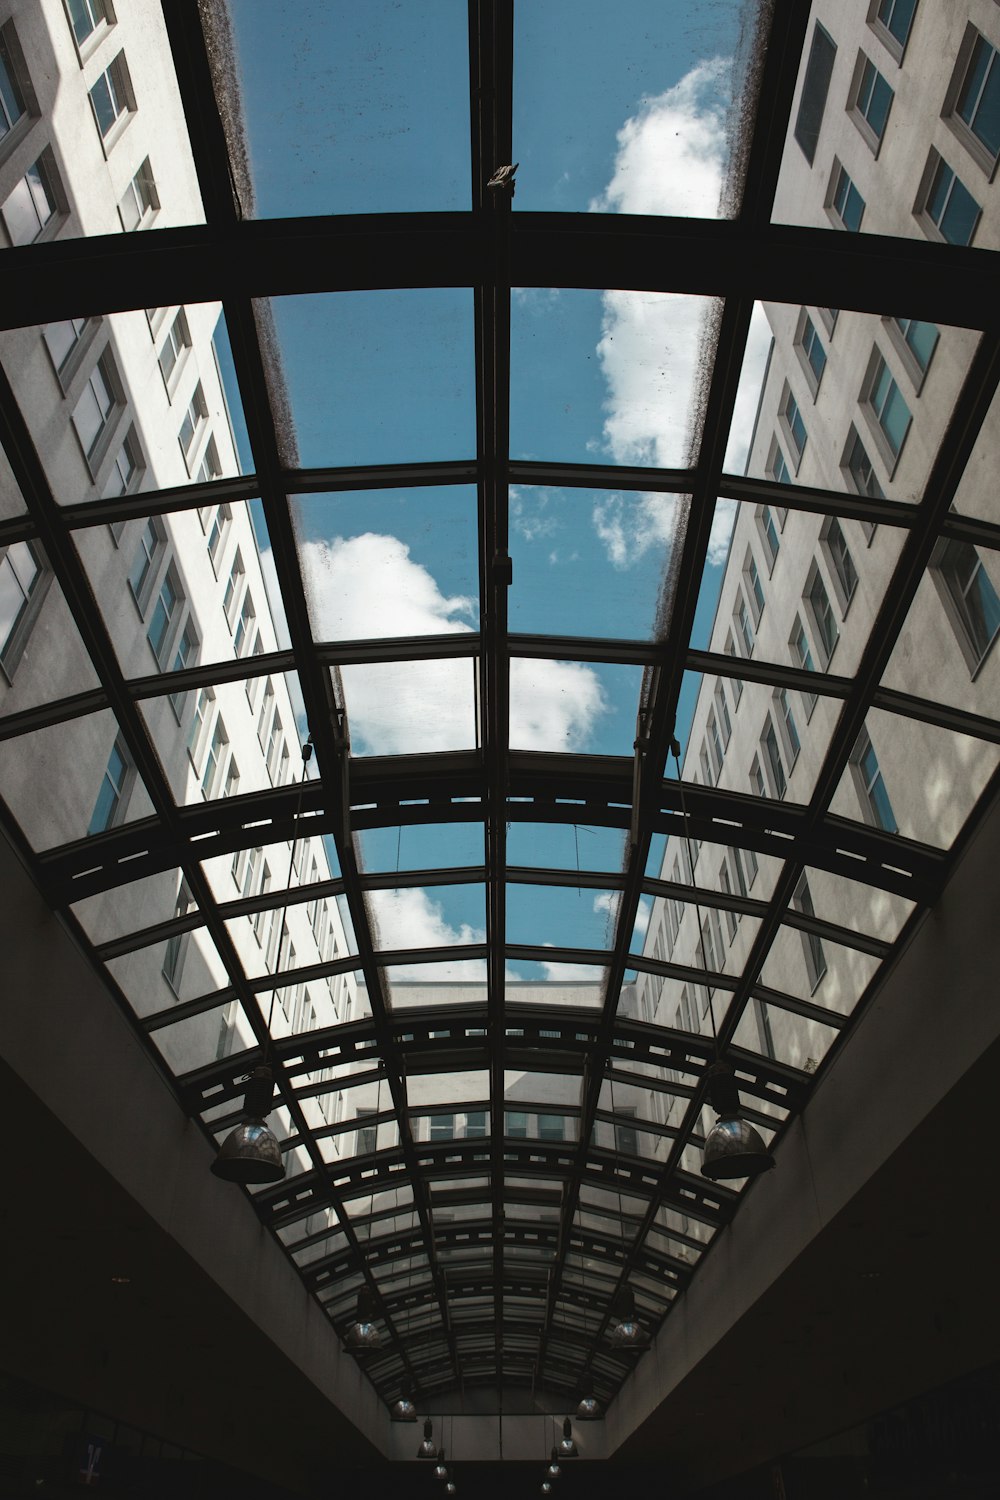 a view of the sky through a glass roof